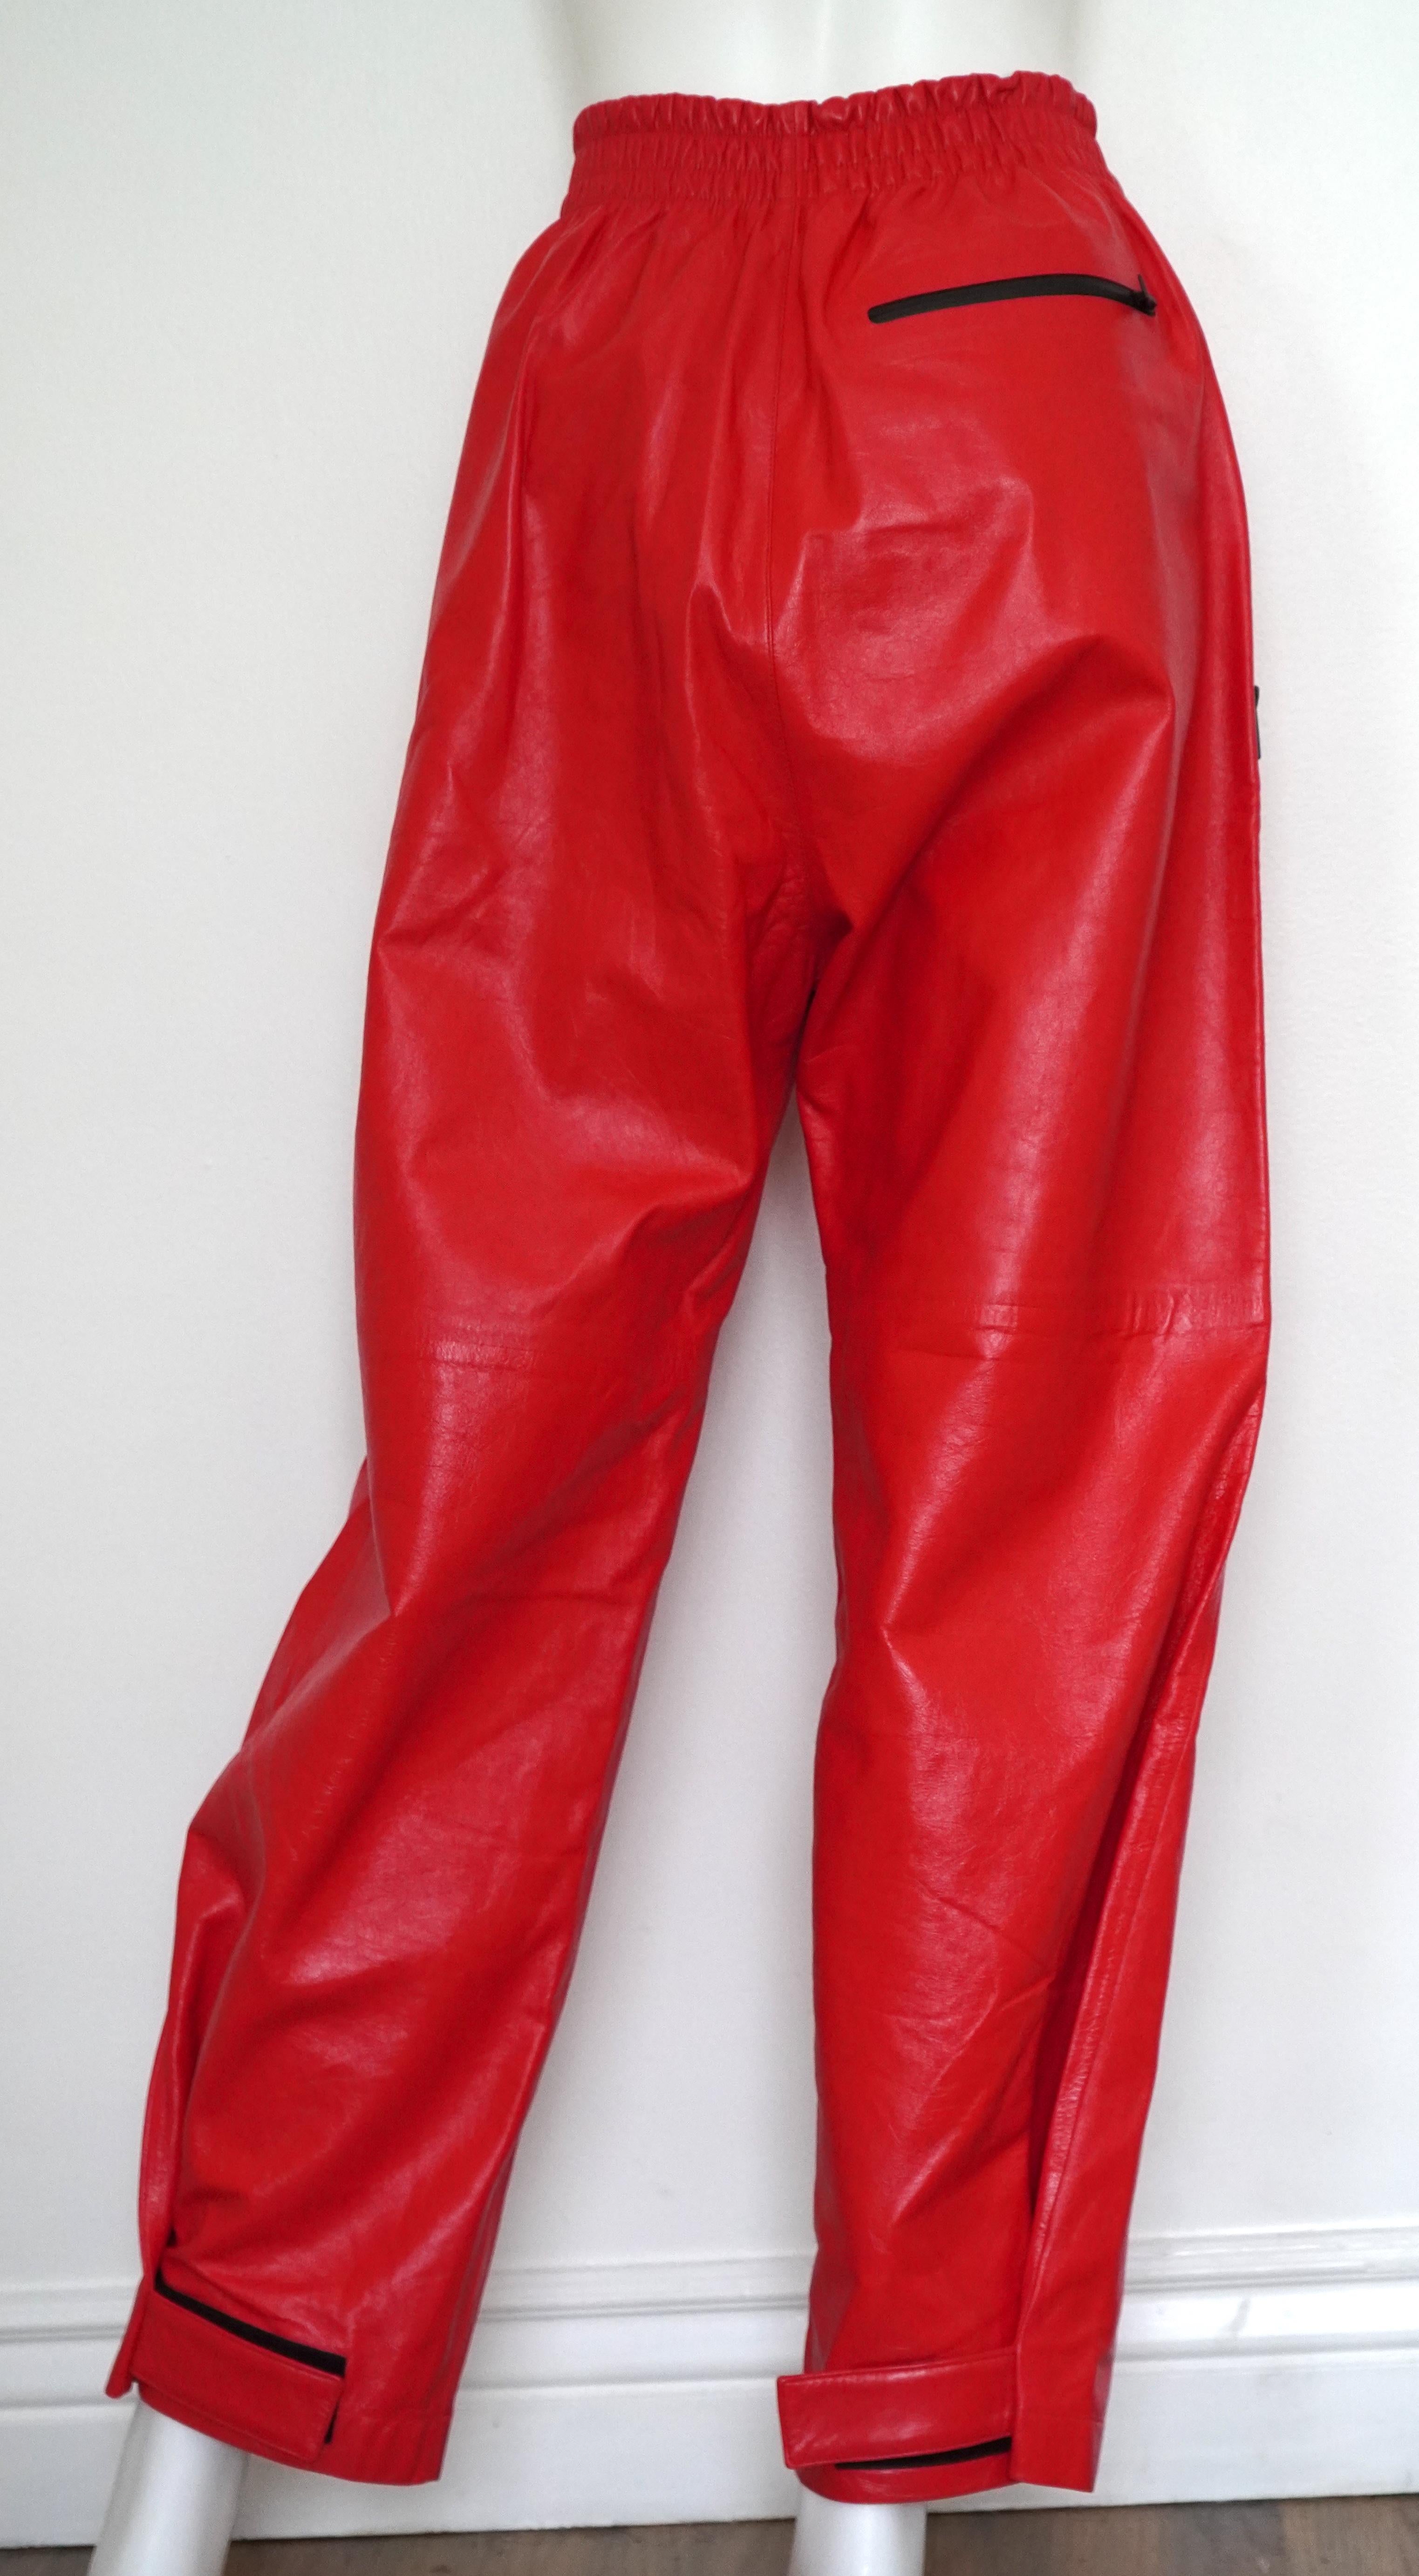 NEW Bottega Veneta red leather pants. Pair these loose fitting Italian made pants with a form fitting top to complete your look.
Product details
• Shiny leather pants
• Elasticated waistband
• Zipped pockets at sides and slip pocket on back
•